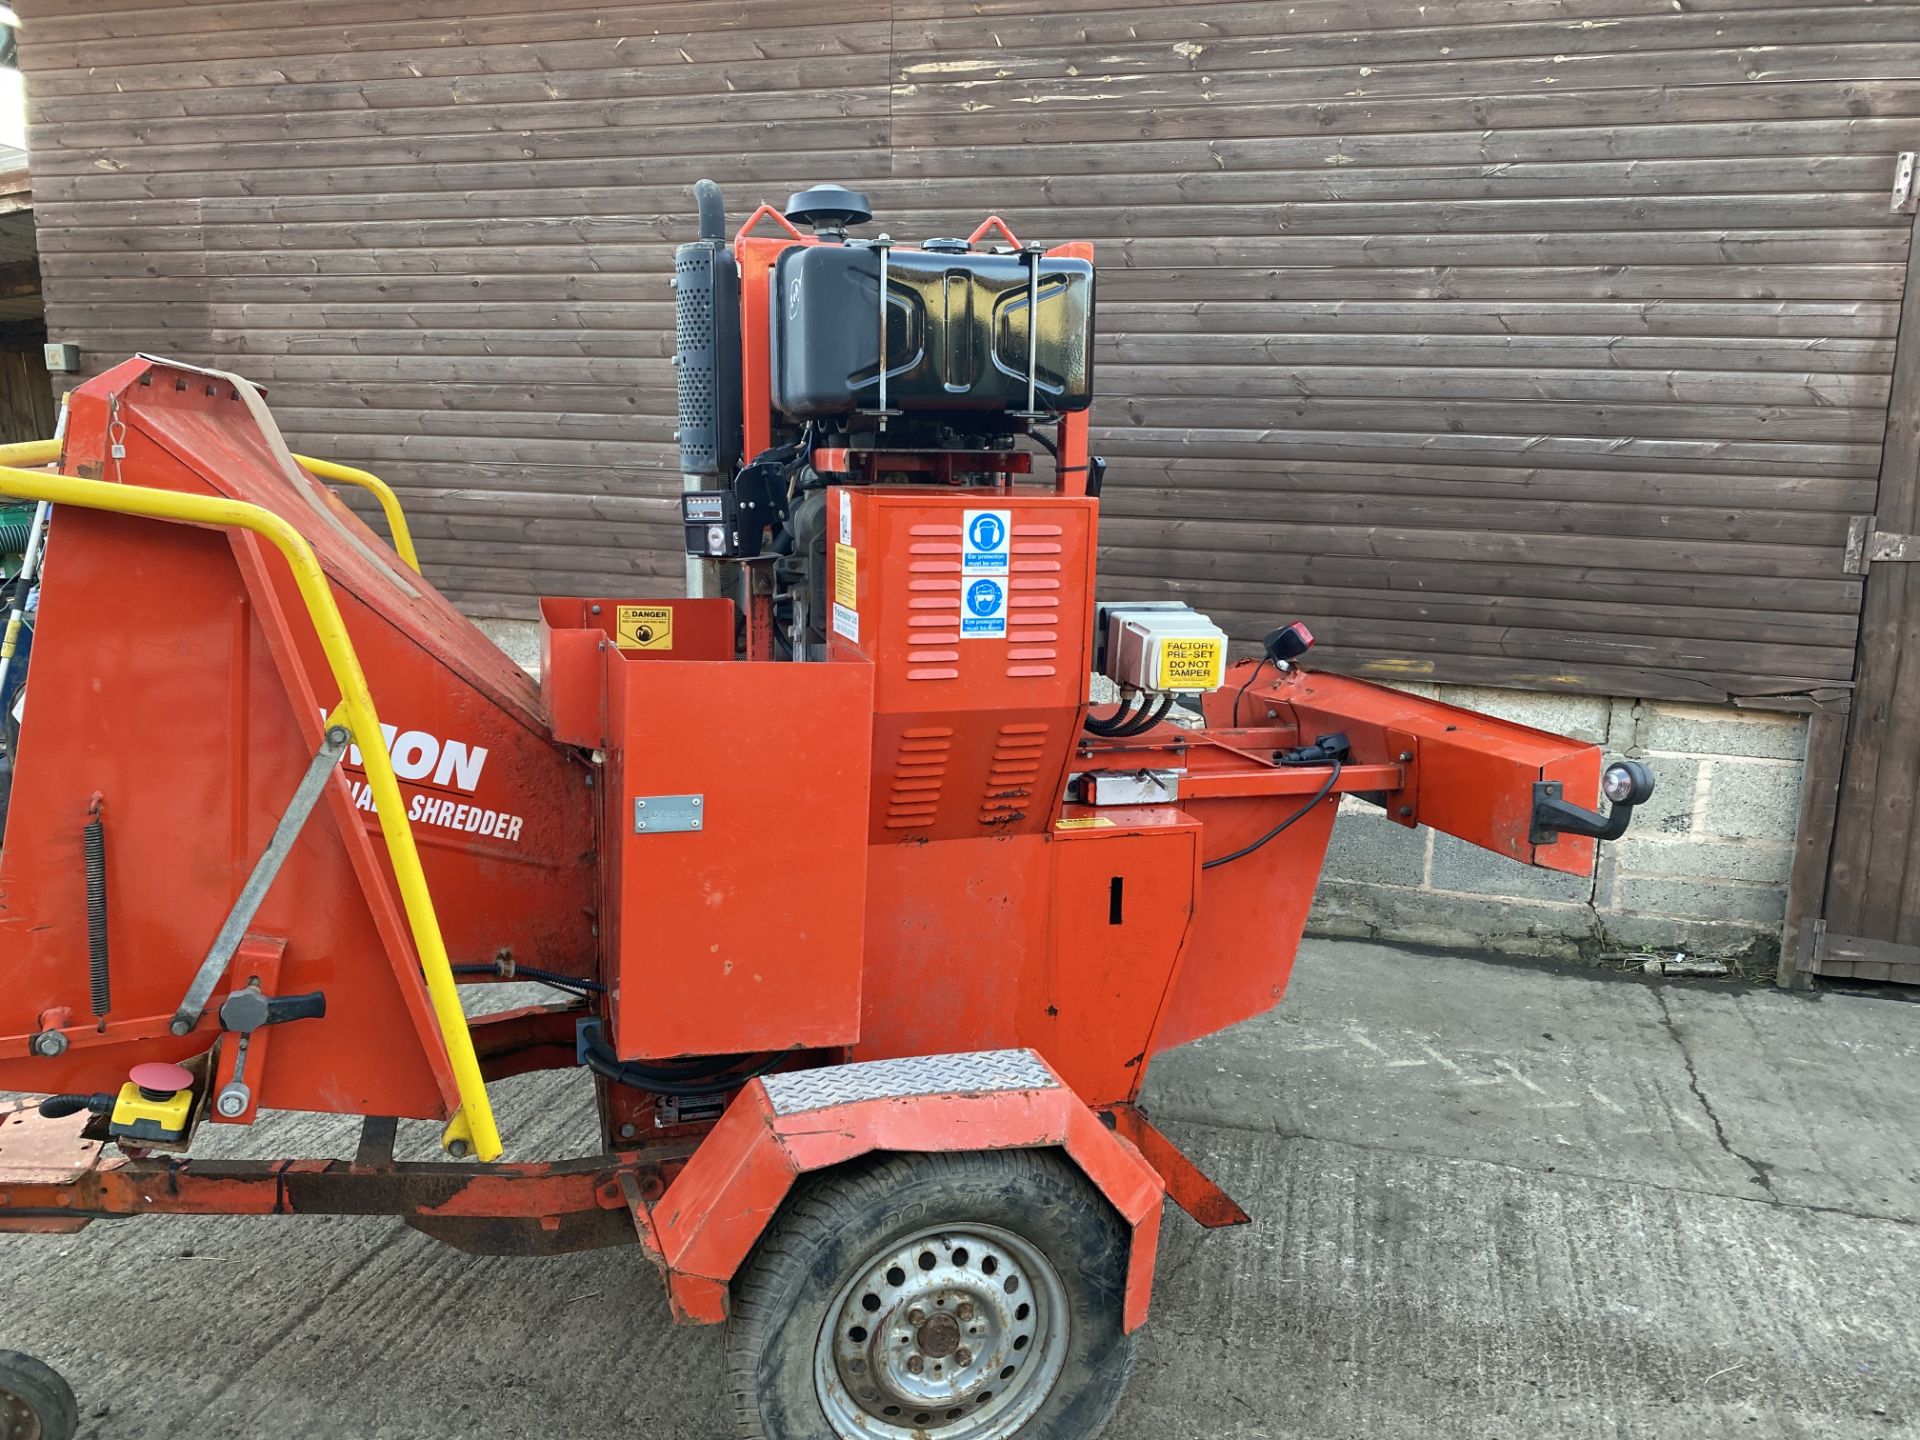 CAMON C300 TOWABLE DIESEL WOOD CHIPPER, DIRECT EX COUNCIL, ONLY 238 HOURS, HYDRAULIC ROLLER FEED - Image 2 of 3